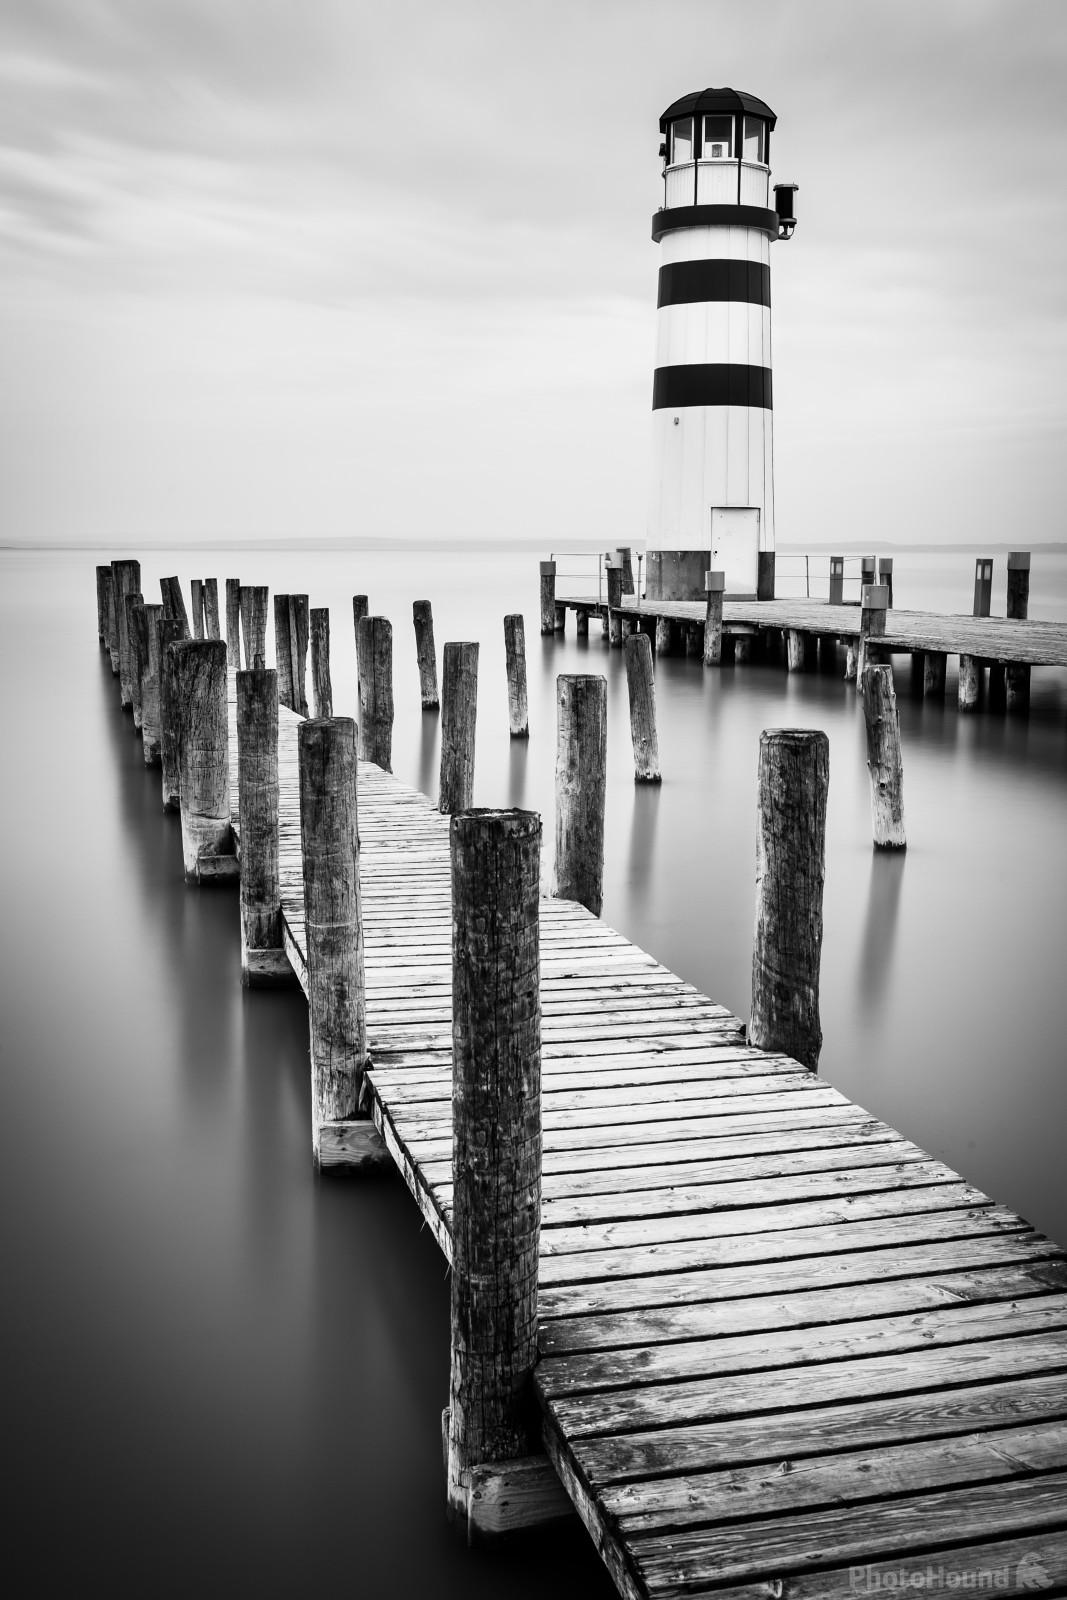 Image of Podersdorf Lighthouse by VOJTa Herout